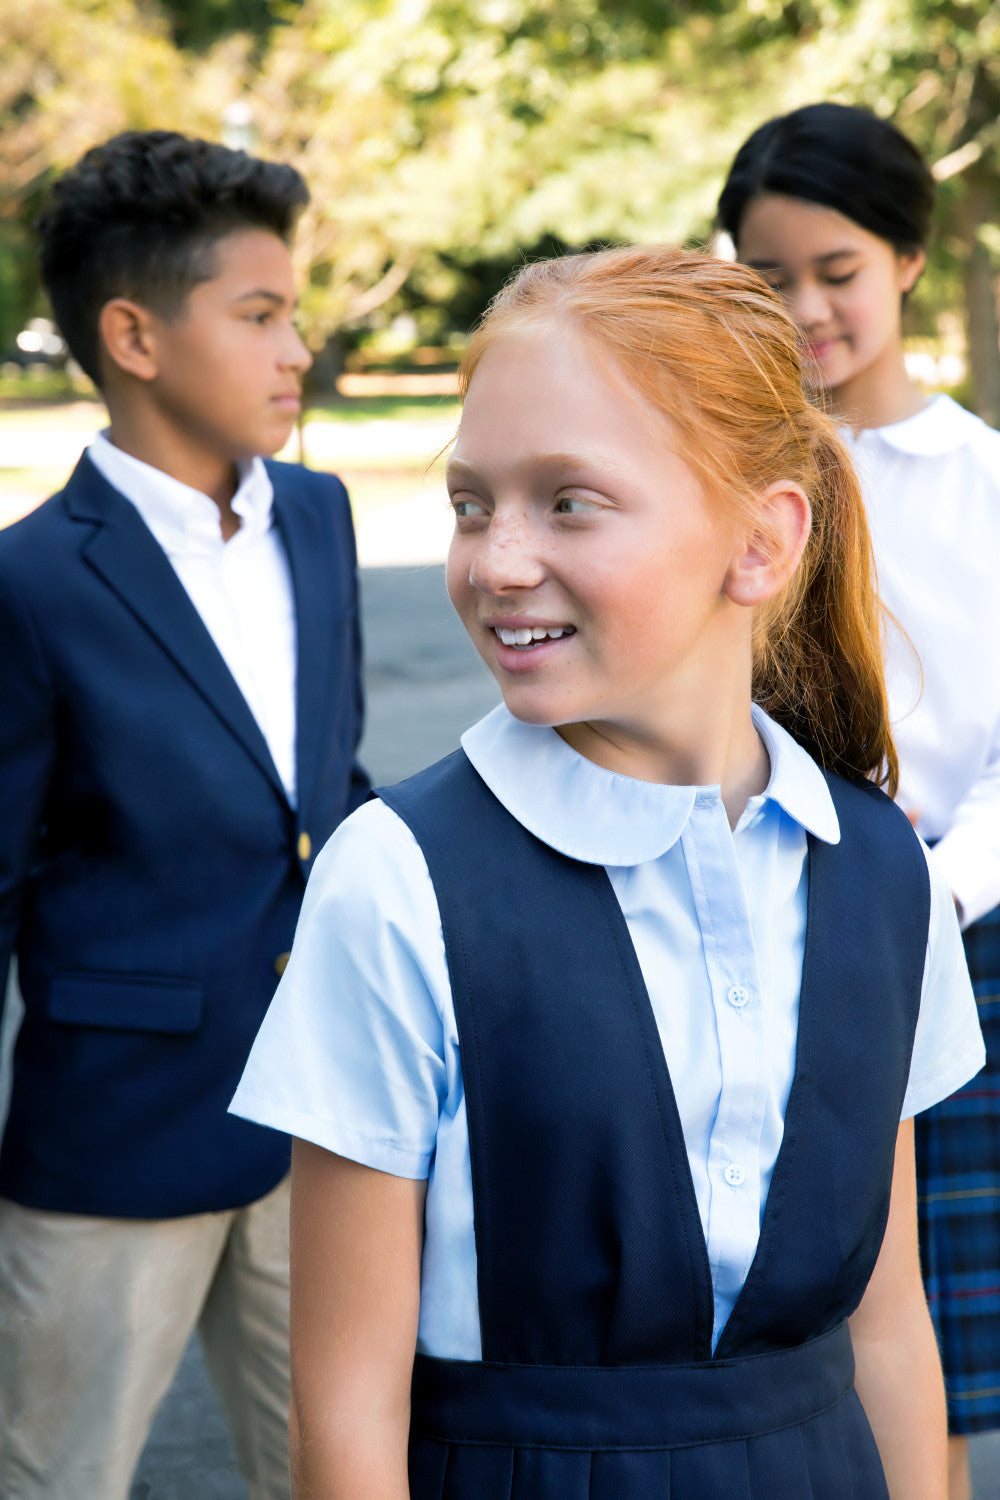 French Toast: Kids School Uniforms - High Quality, Durable